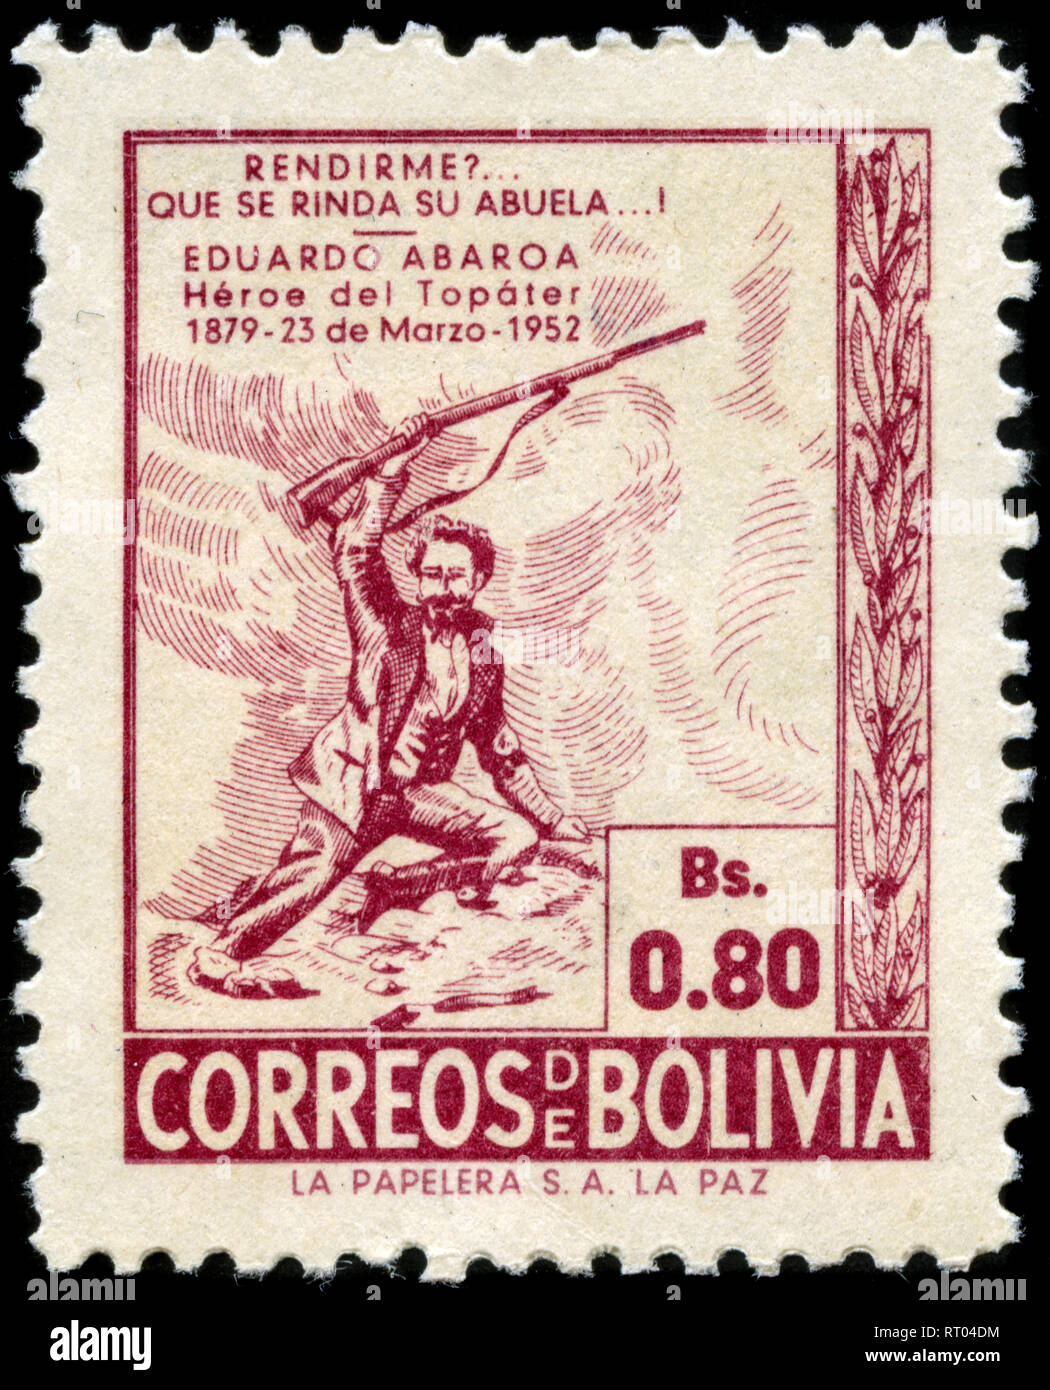 Postage stamp from Bolivia in the 73rd anniversary of the death of Eduardo Abaroa series issued in 1952 Stock Photo